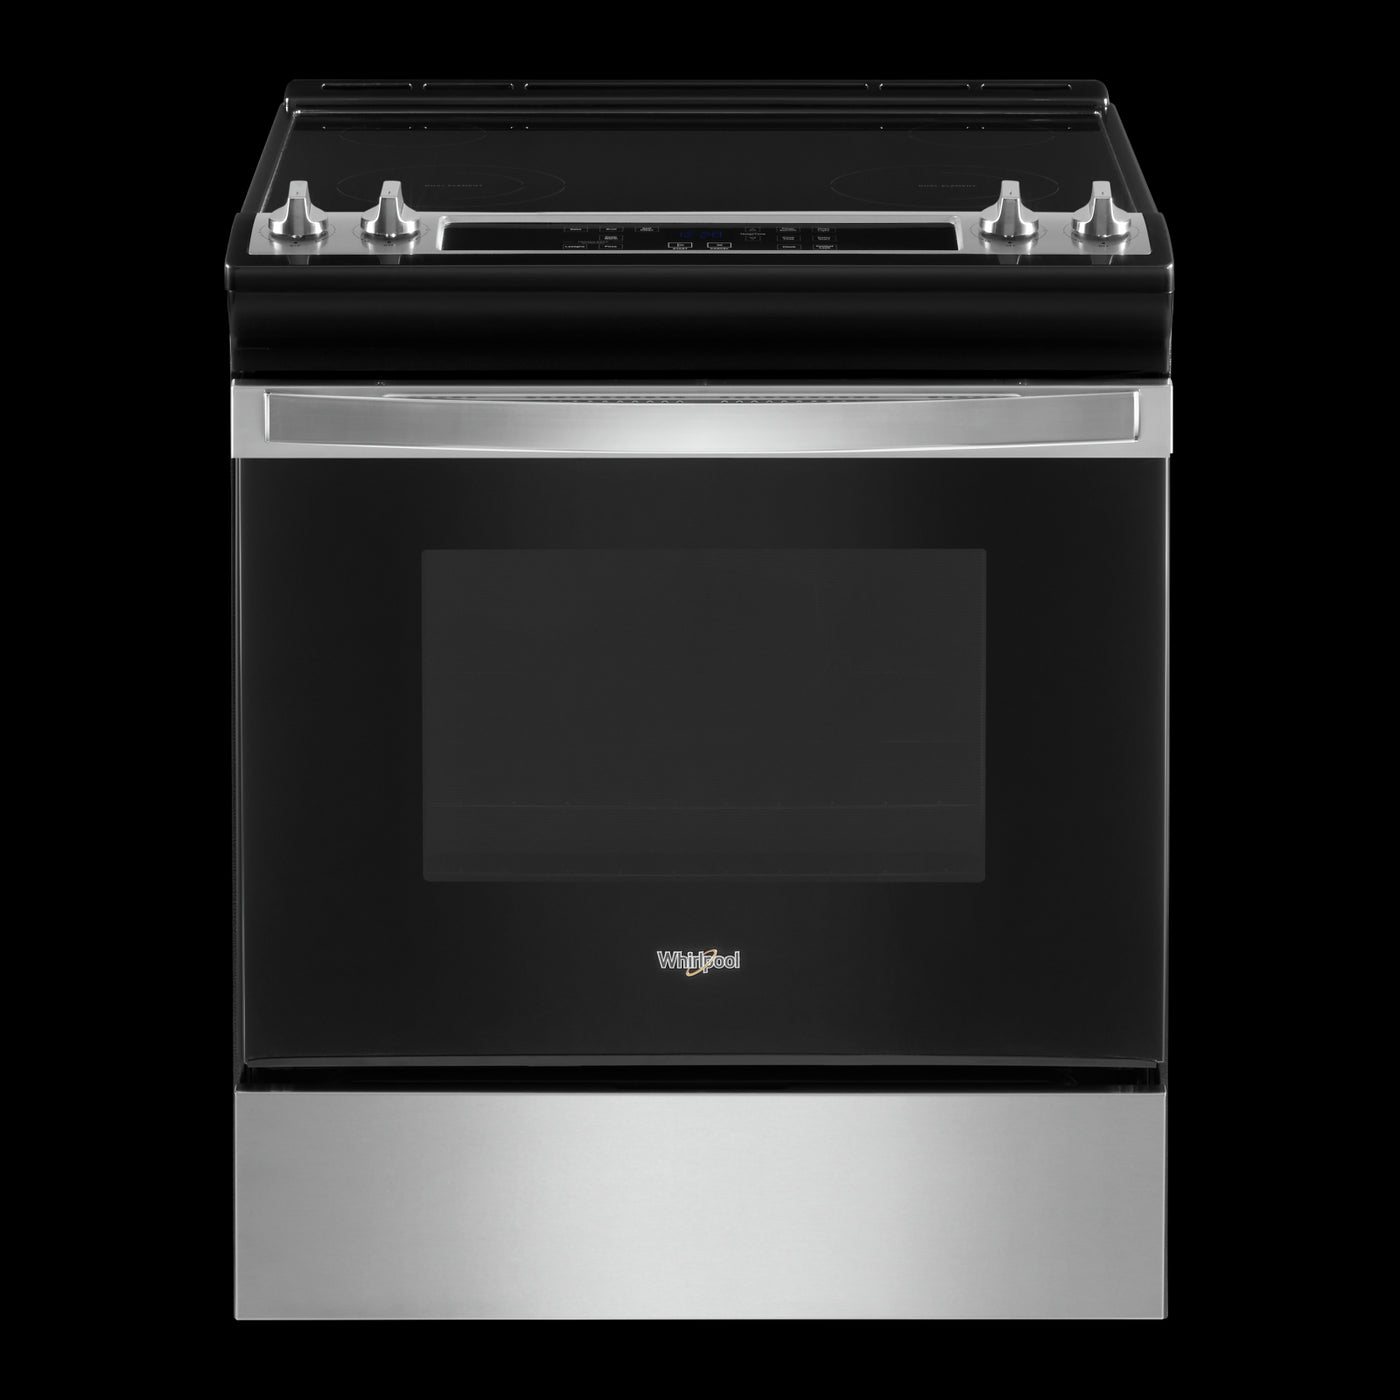 Whirlpool Stainless Steel Electric Range with Frozen Bake Technology (4.8 Cu.Ft) - YWEE515S0LS